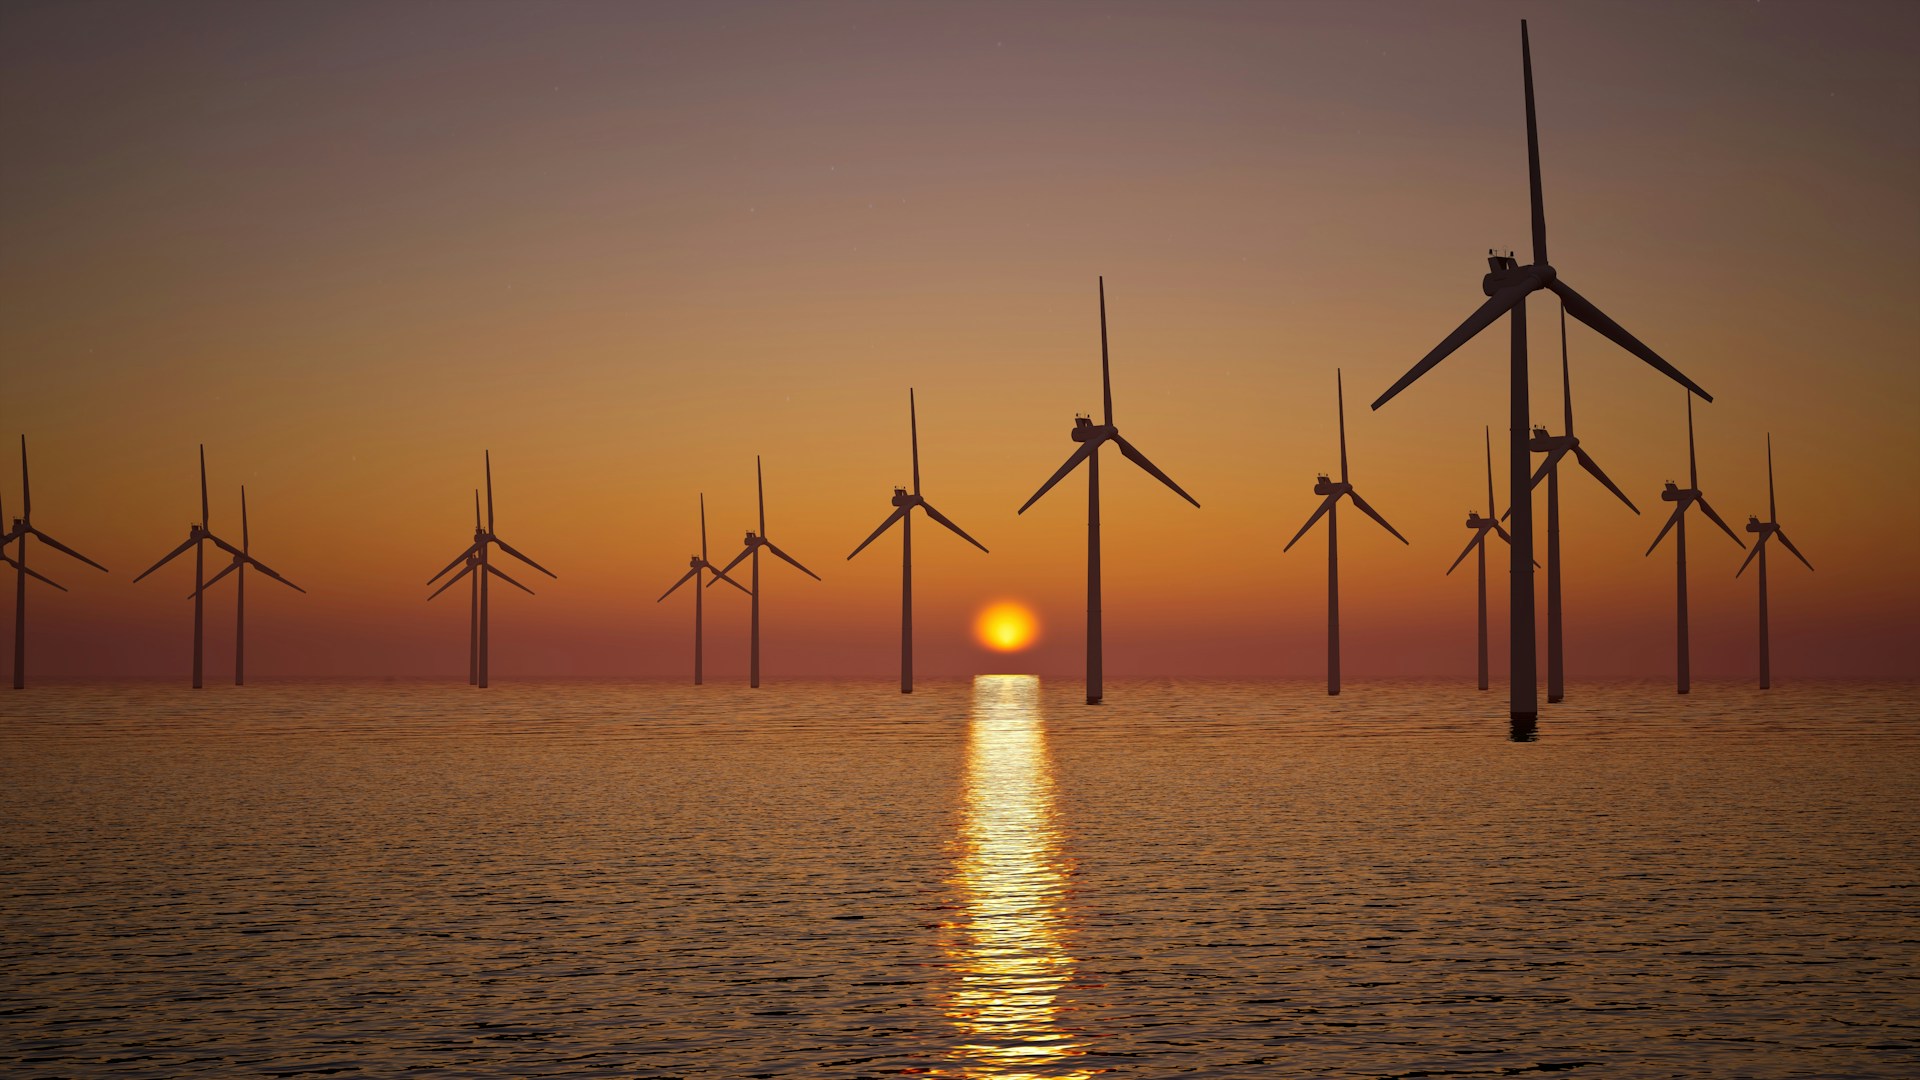 Australia Offshore Windfarm Considerably Smaller than Proposed